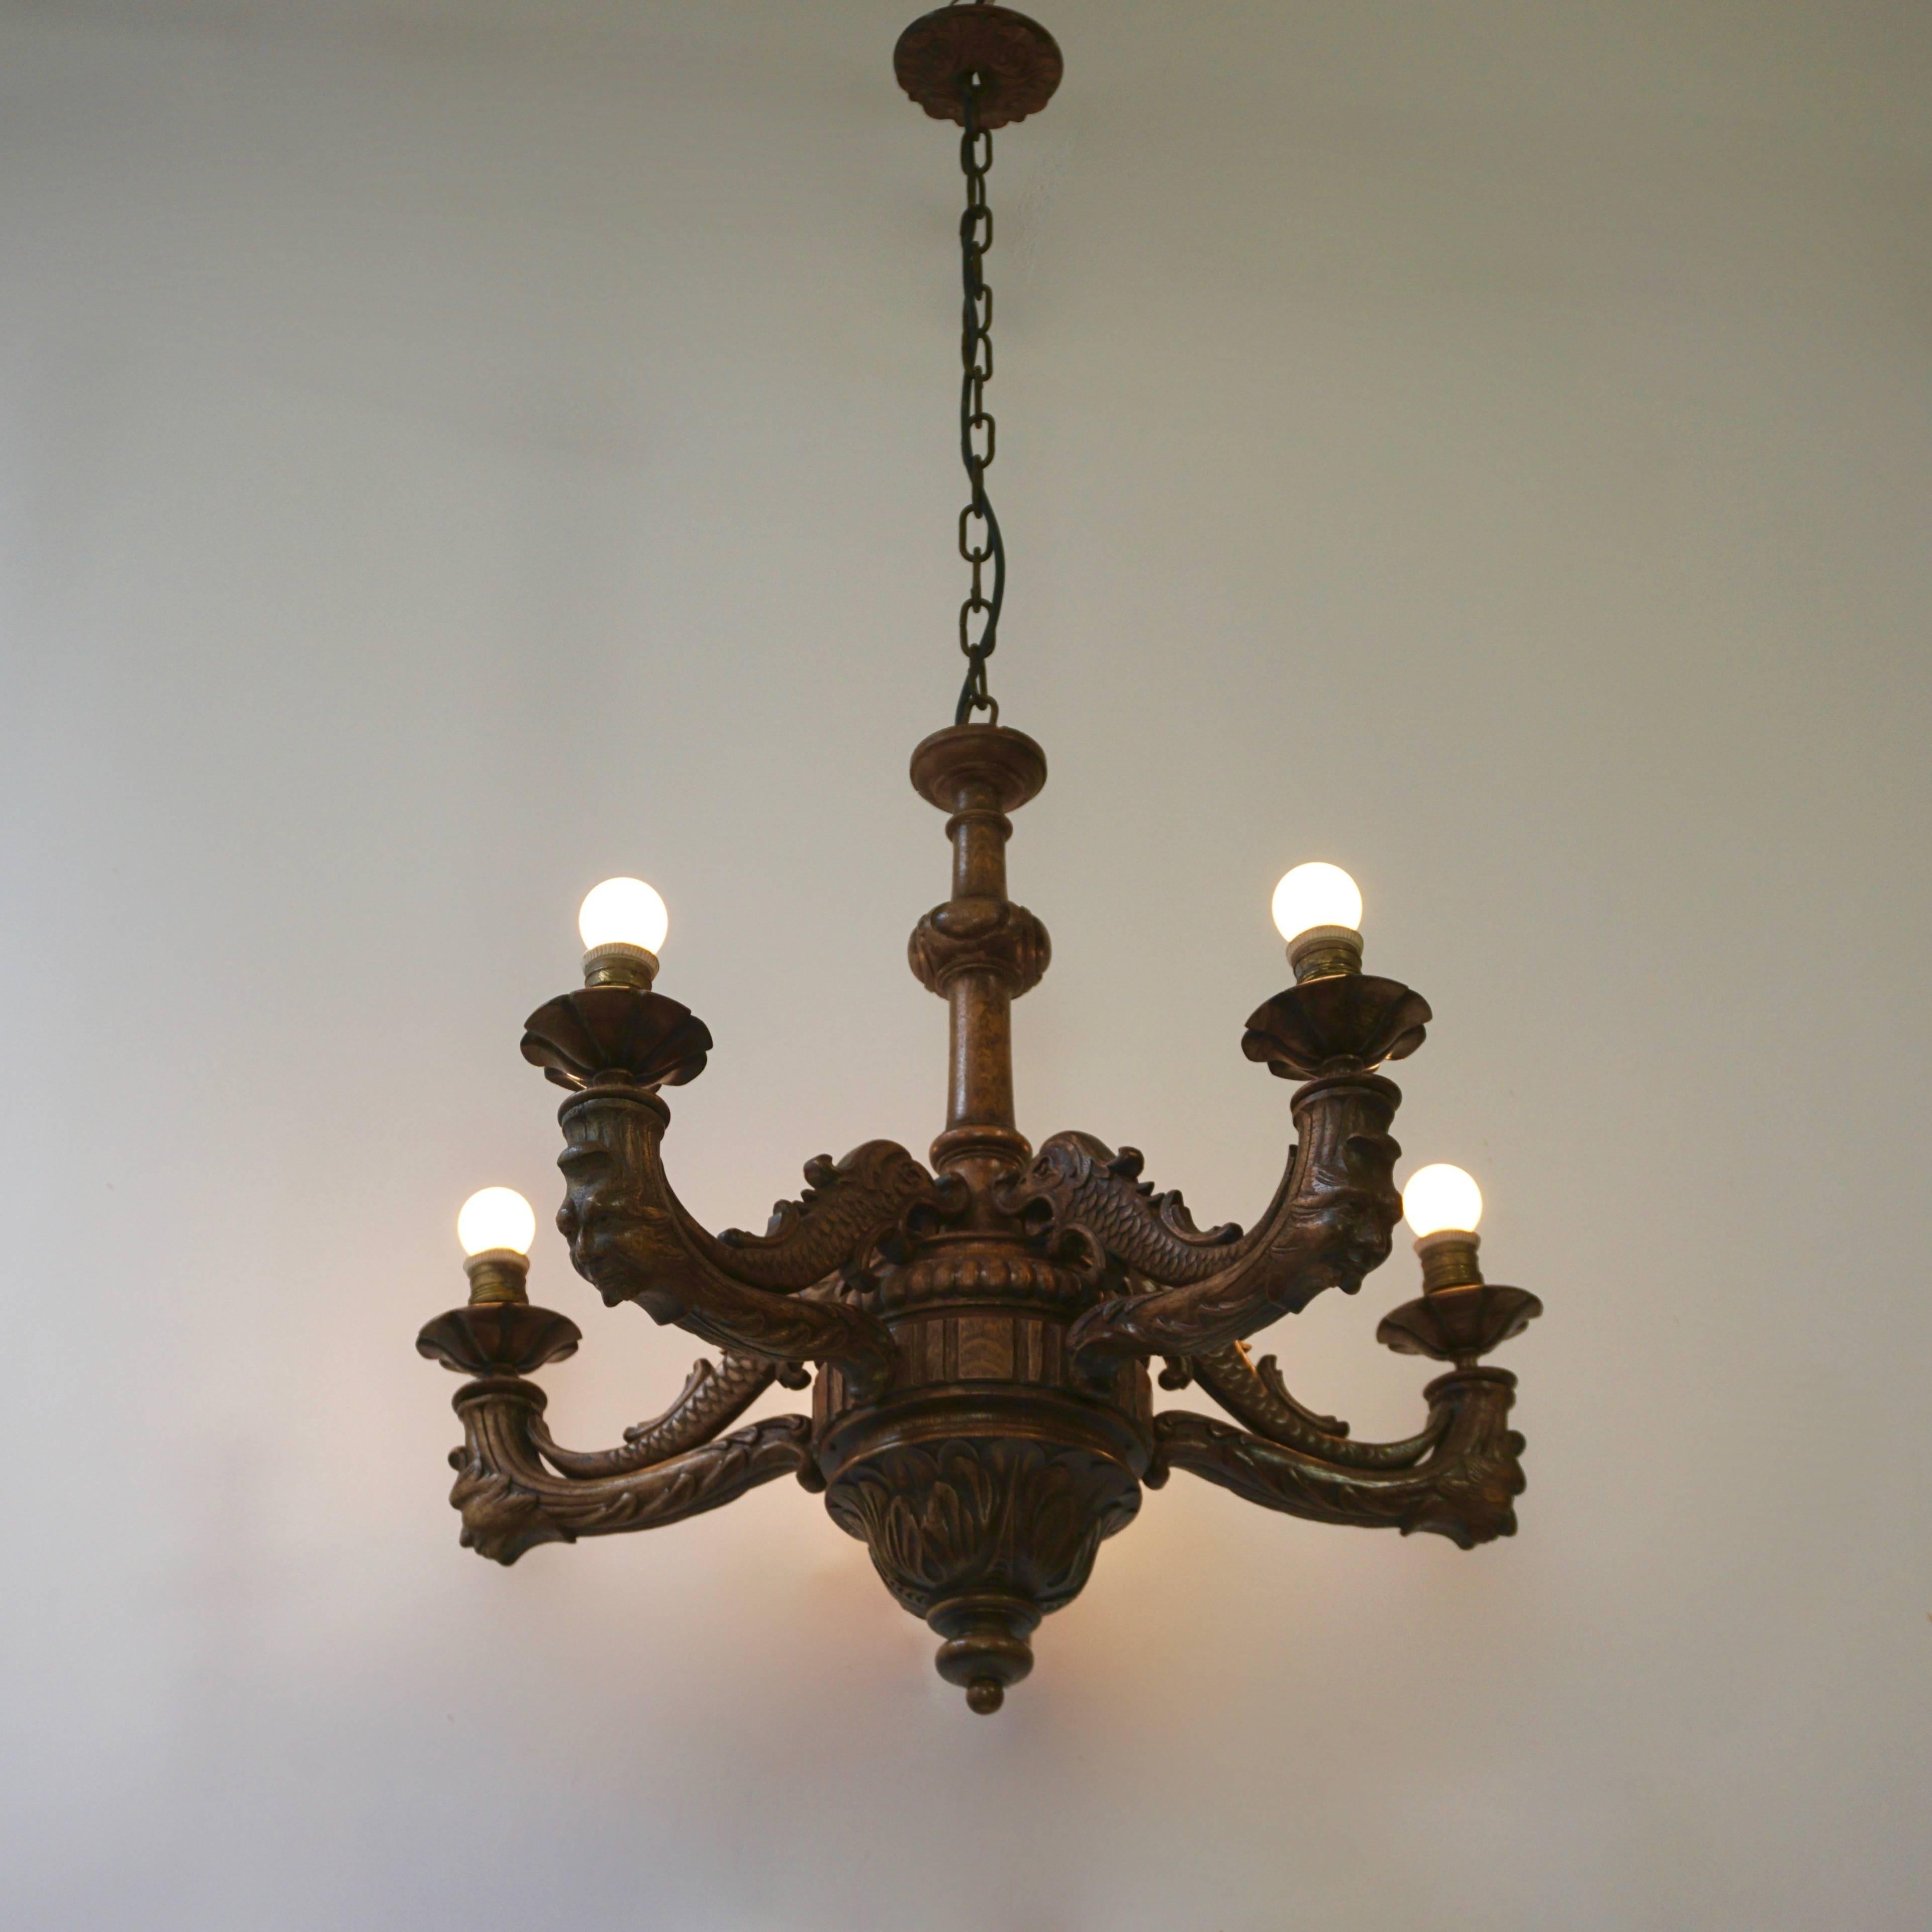 Antique carved wood chandelier with five arms. Excellent craftsmanship. Comes with chain and original carved wood canopy.

Total height with the chain is 125 cm.
Diameter is 70 cm.
   